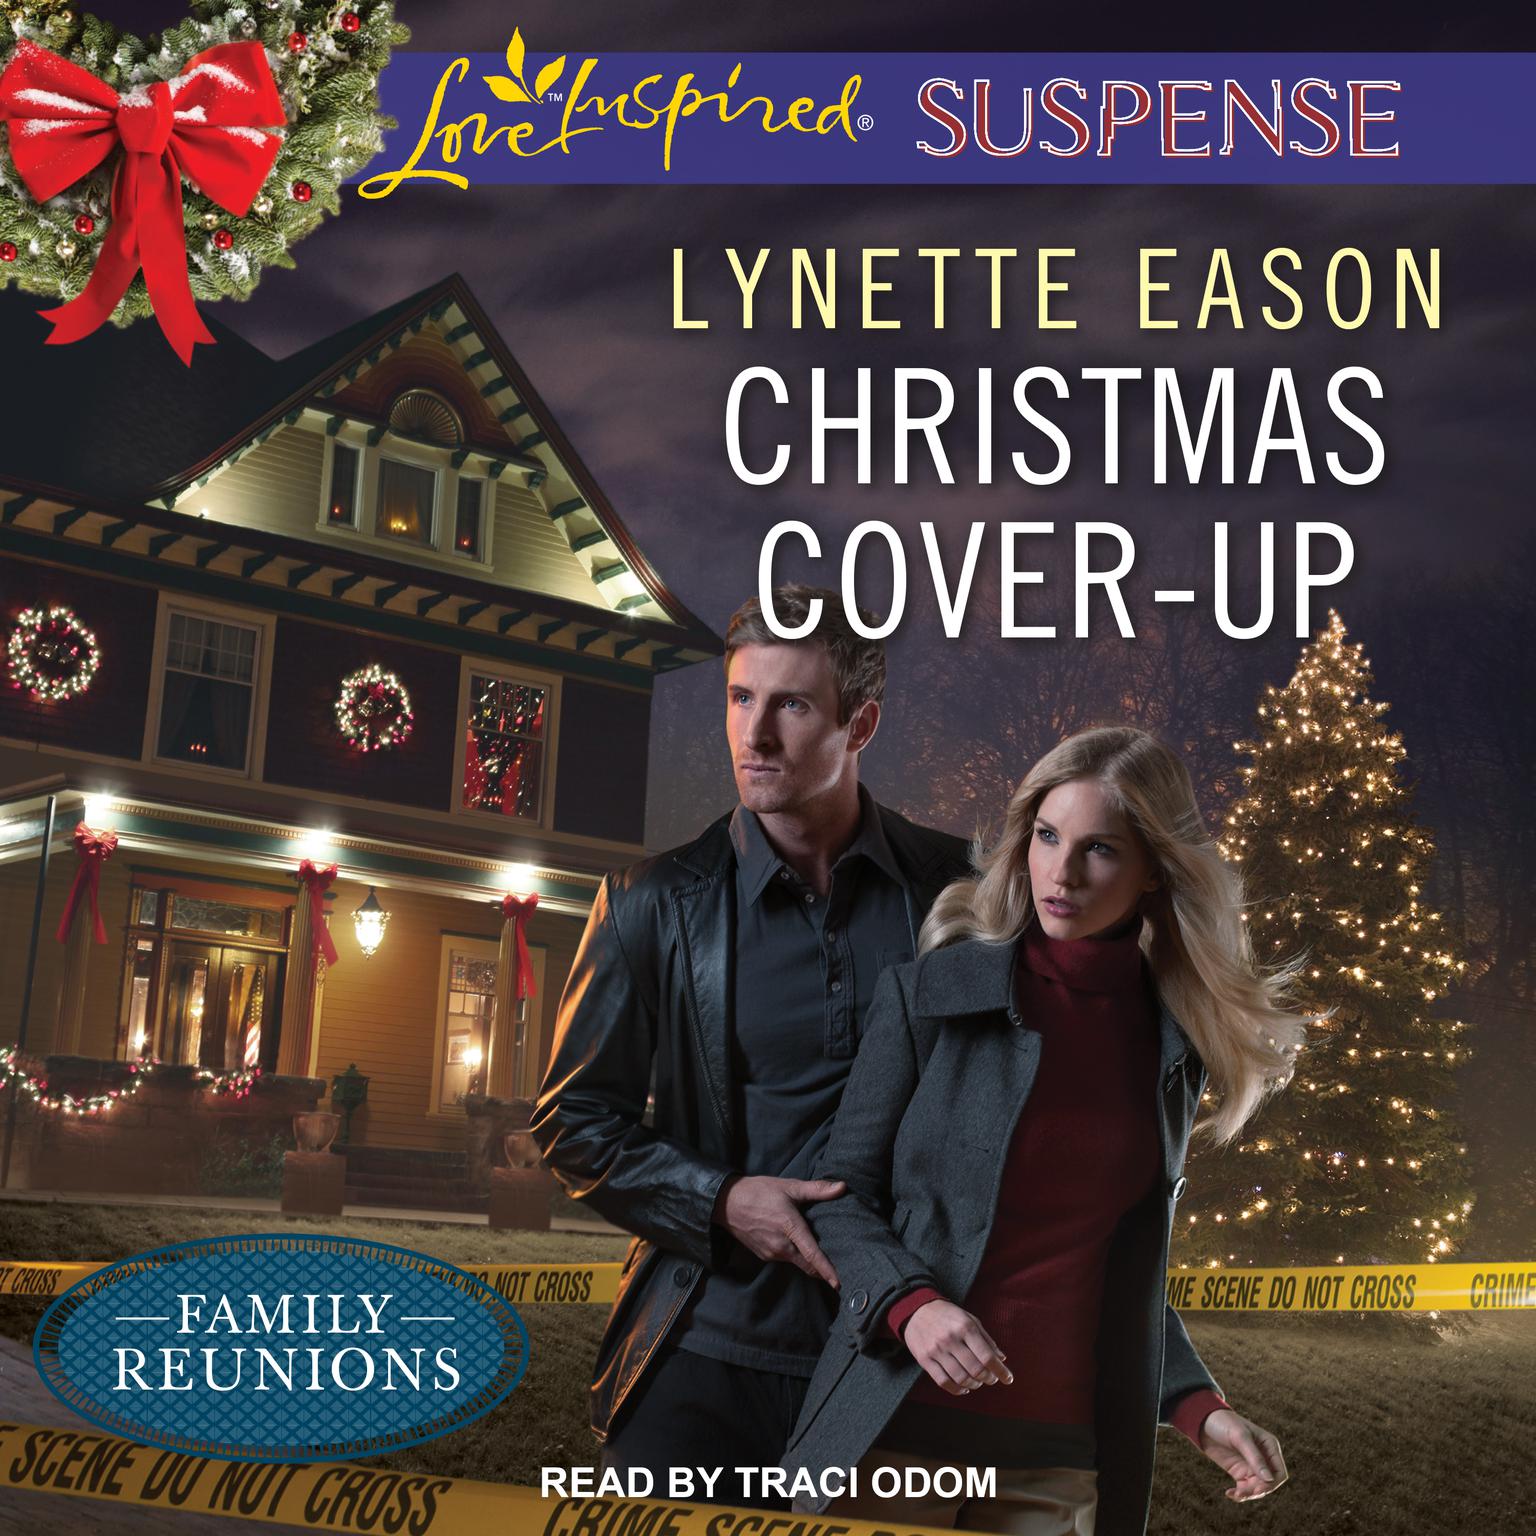 Christmas Cover-Up Audiobook, by Lynette Eason